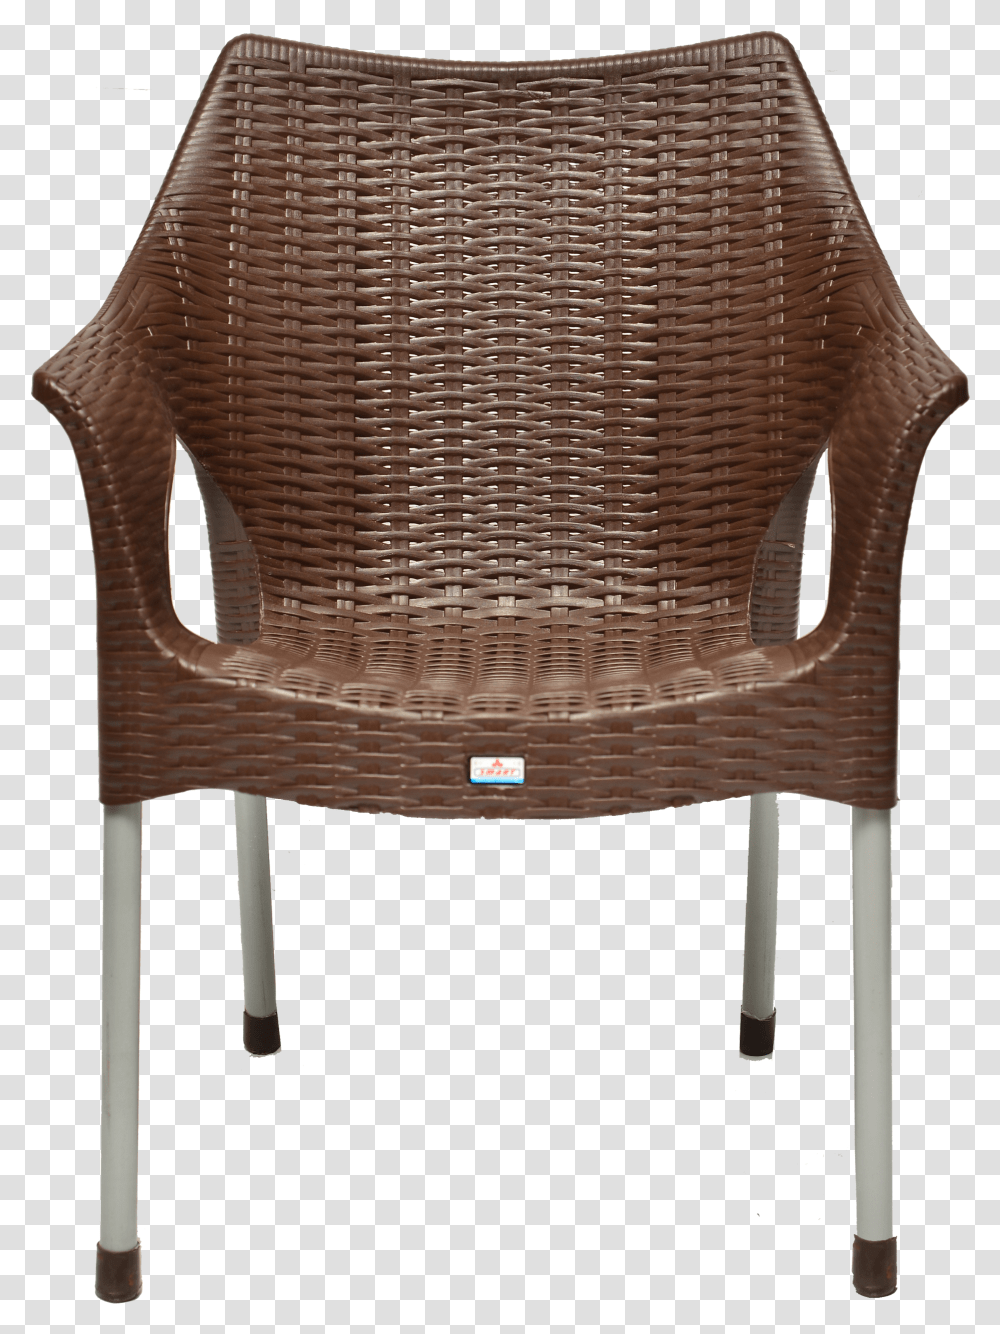 Plastic Chairs Chair Transparent Png